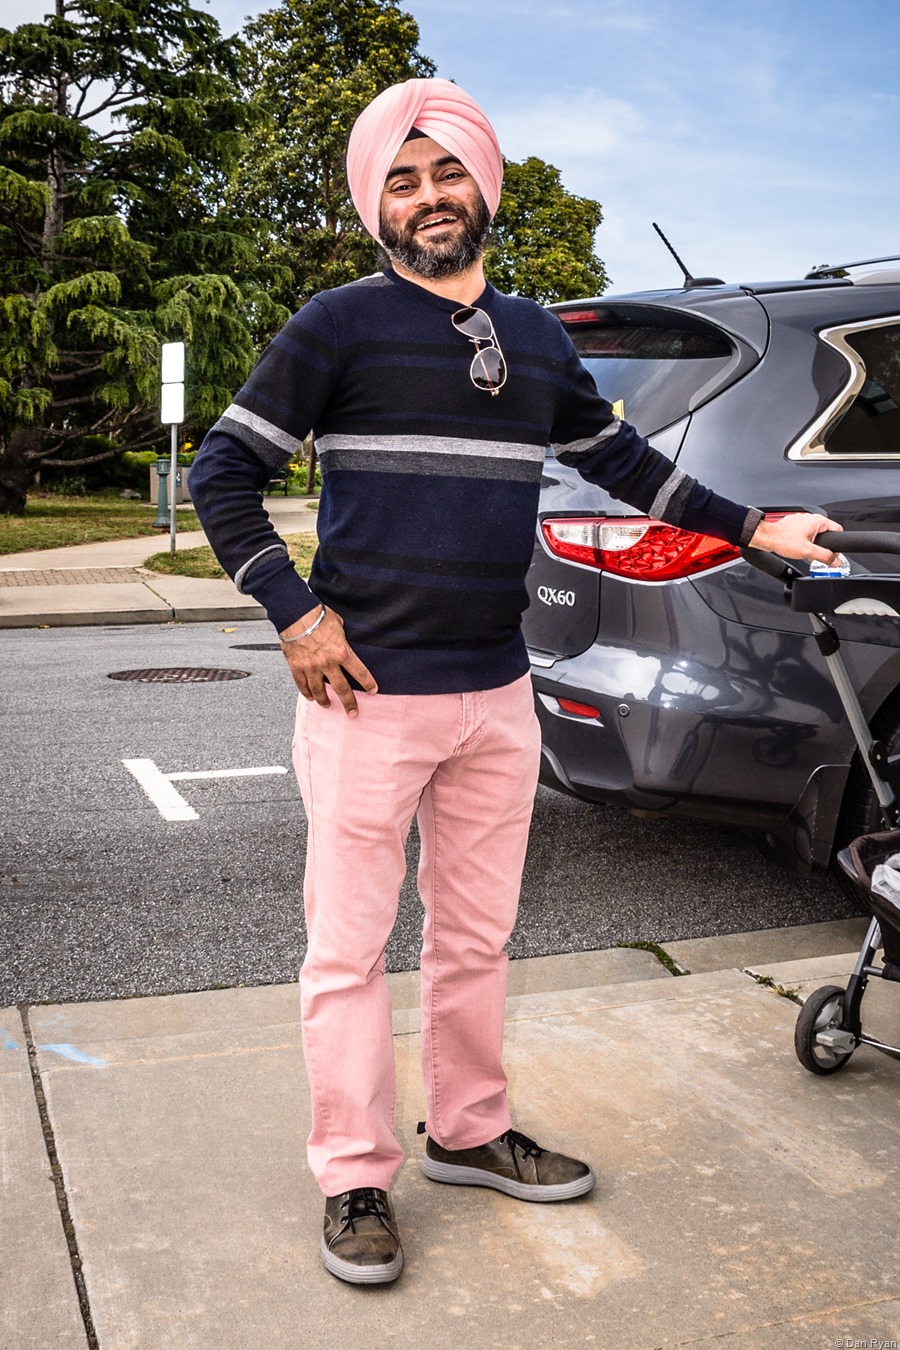 Once you've photographed a suburban Sikh dad in coordinated shades of pink, you've reached some kind of visual pinnacle...
Brisbane, California, April 2019